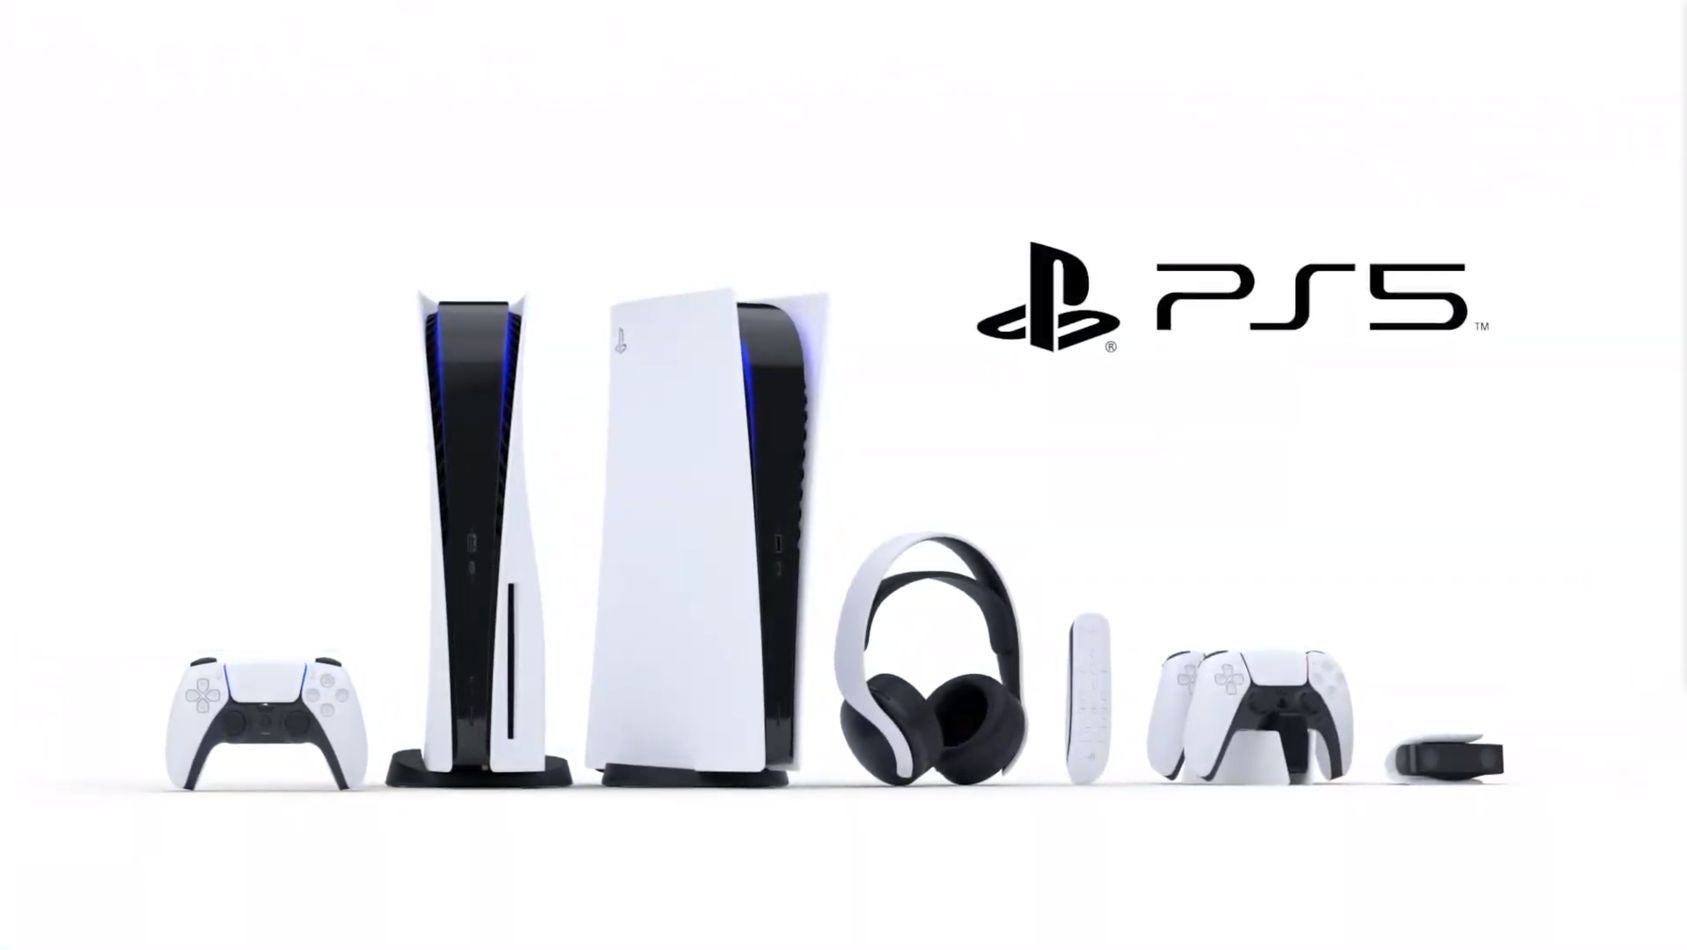 PS5 specs and features, including SSD, ray tracing, GPU and CPU